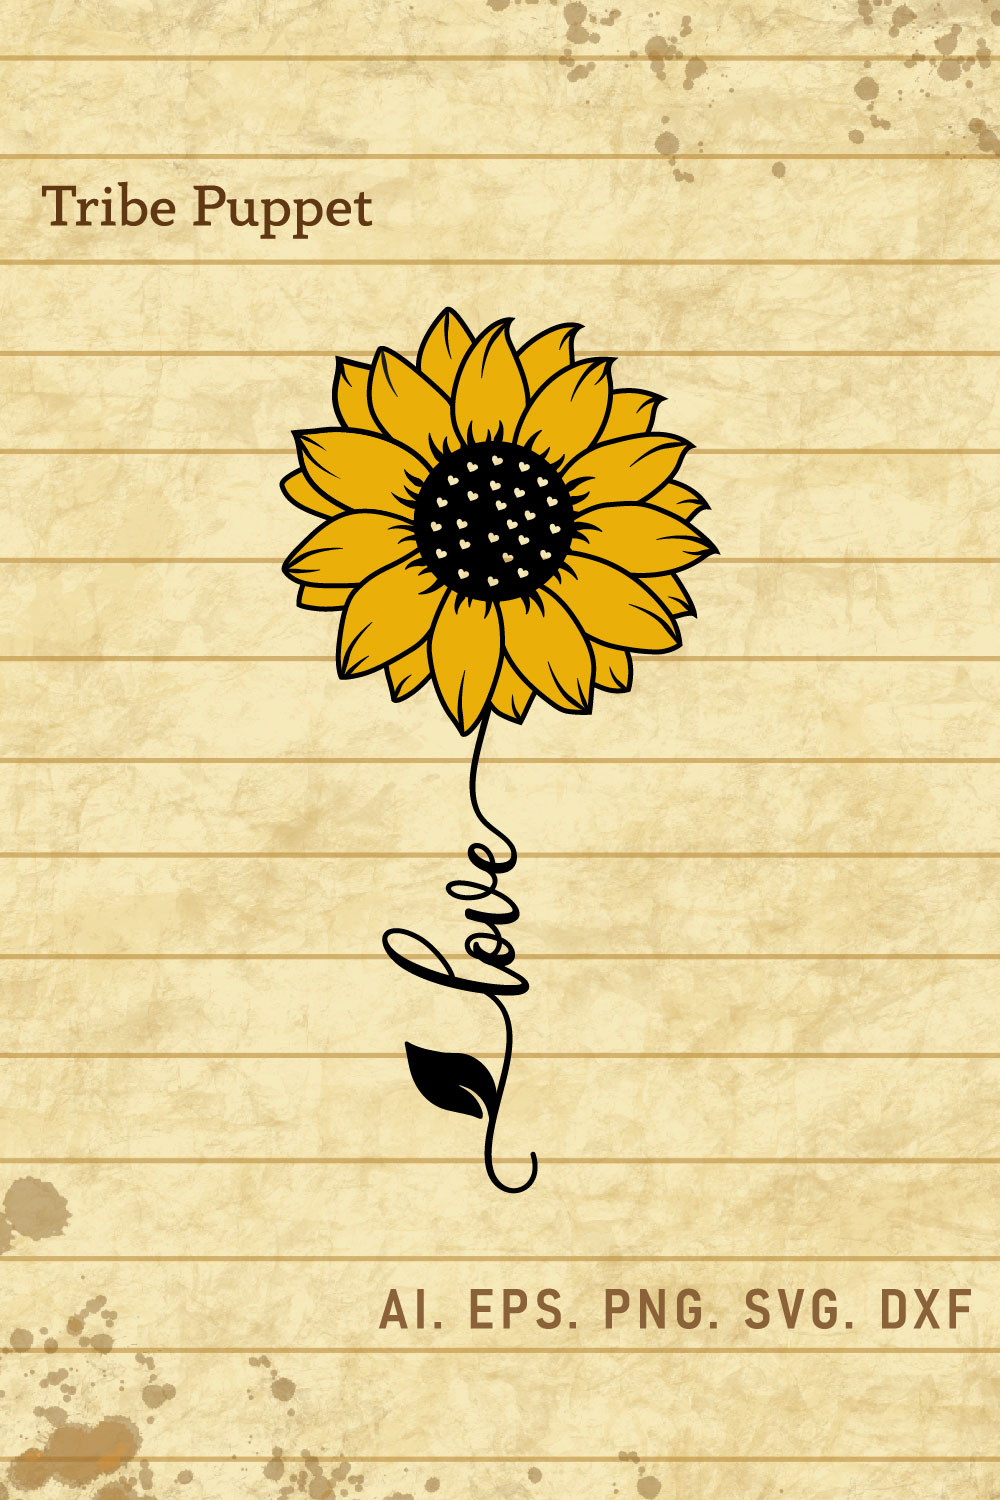 Sunflower 04 pinterest preview image.